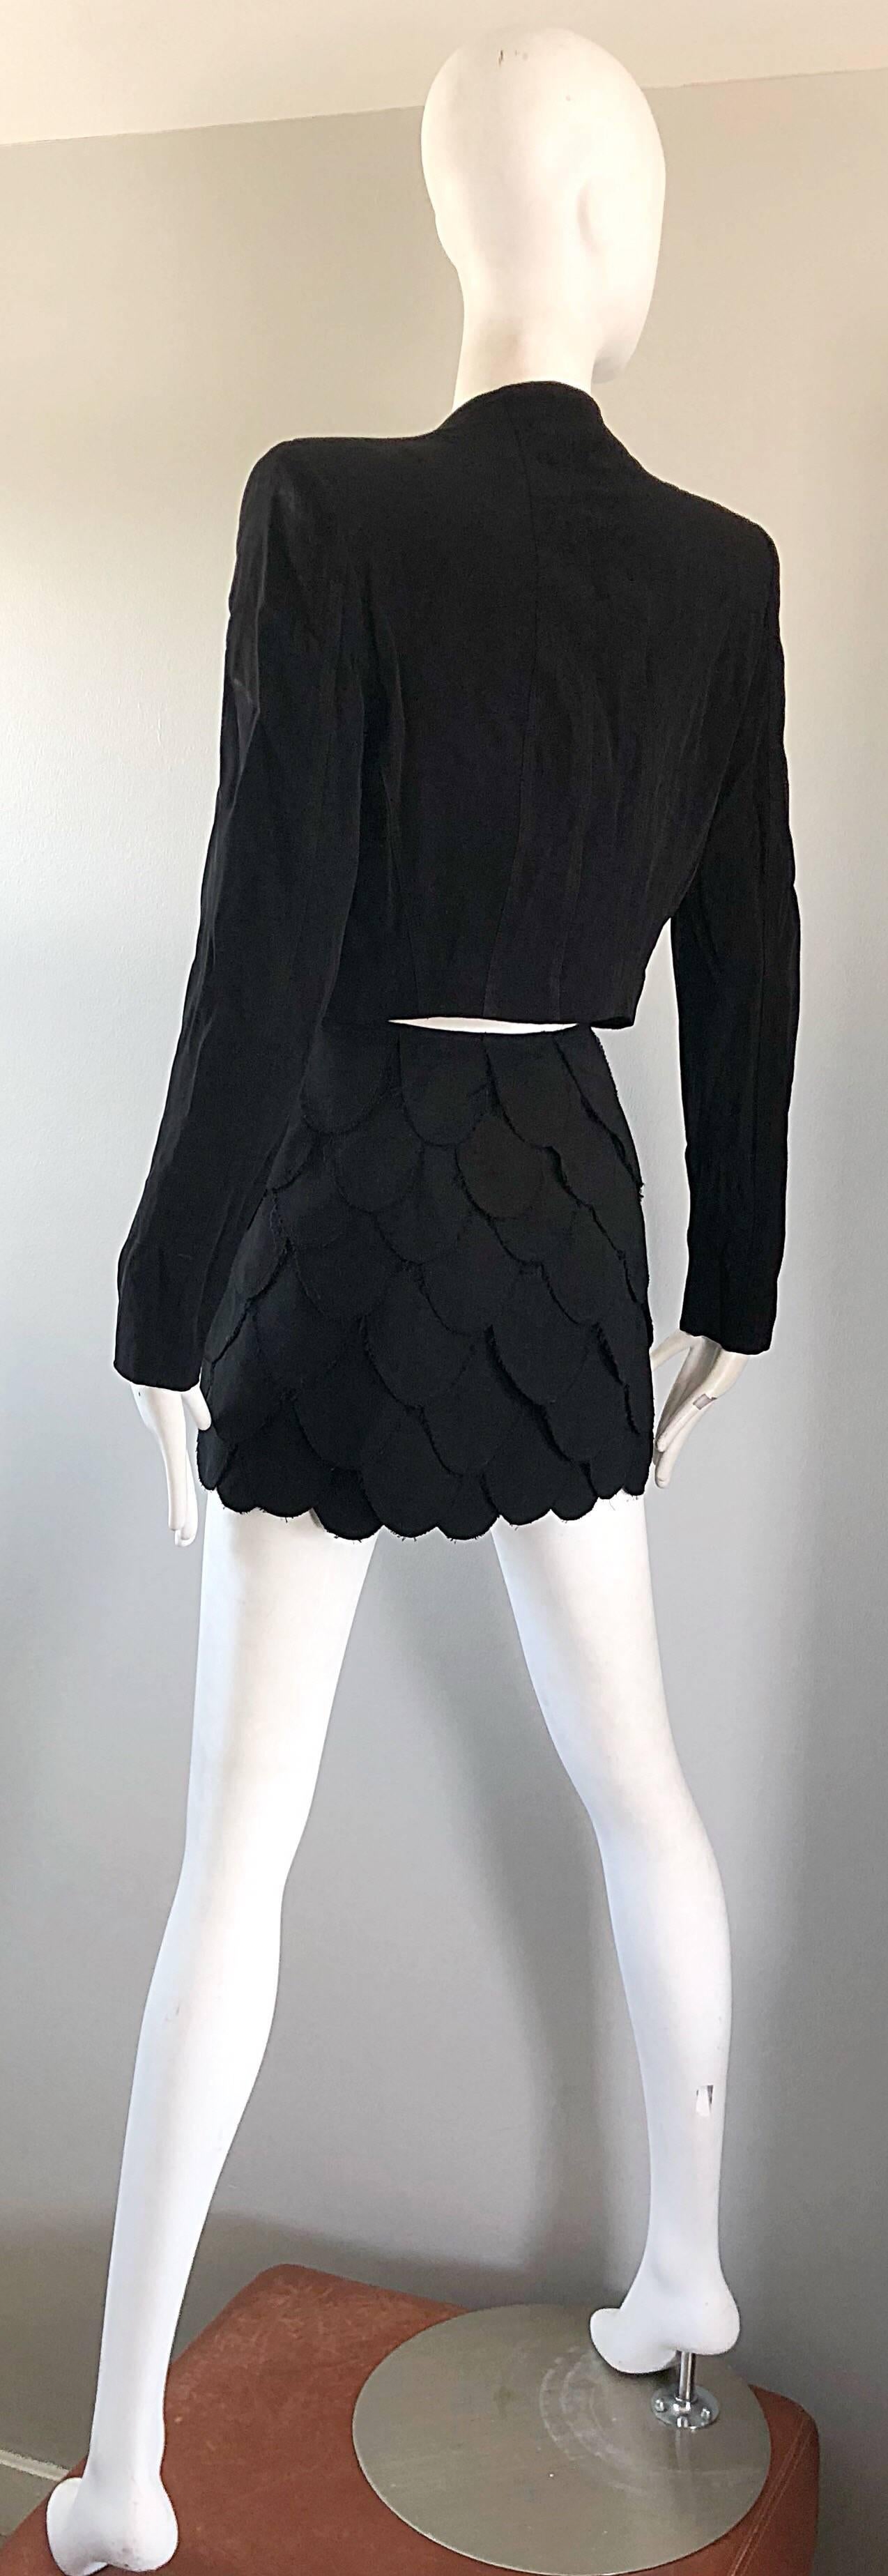 Moschino Cheap & Chic Vintage 90s Black Size 4 Carwash Fringe Mini Skirt For Sale 3